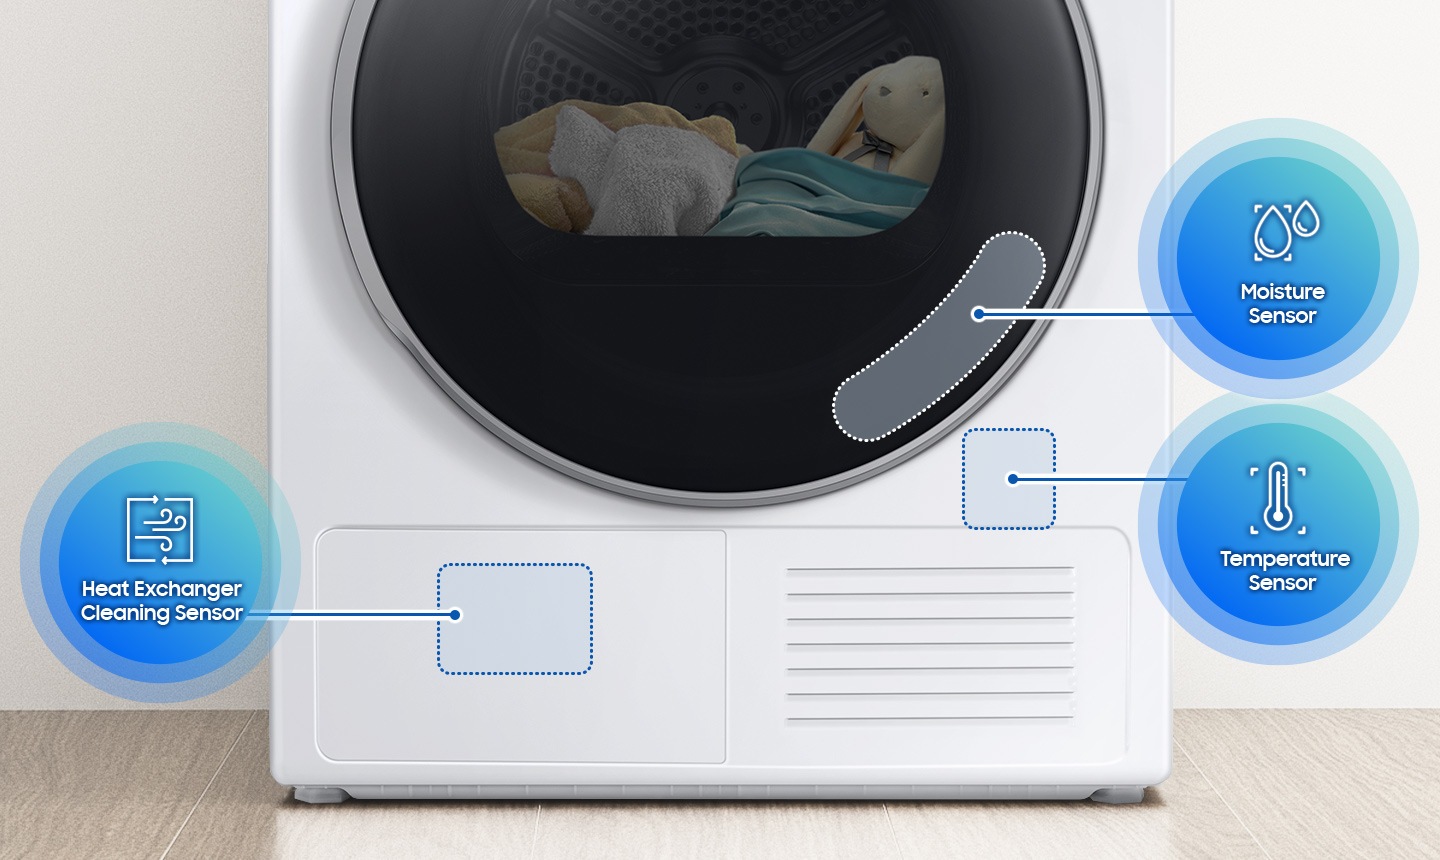 Moisture, Temperature, and Heat Exchanger Cleaning sensors monitor the progress of the dryer.